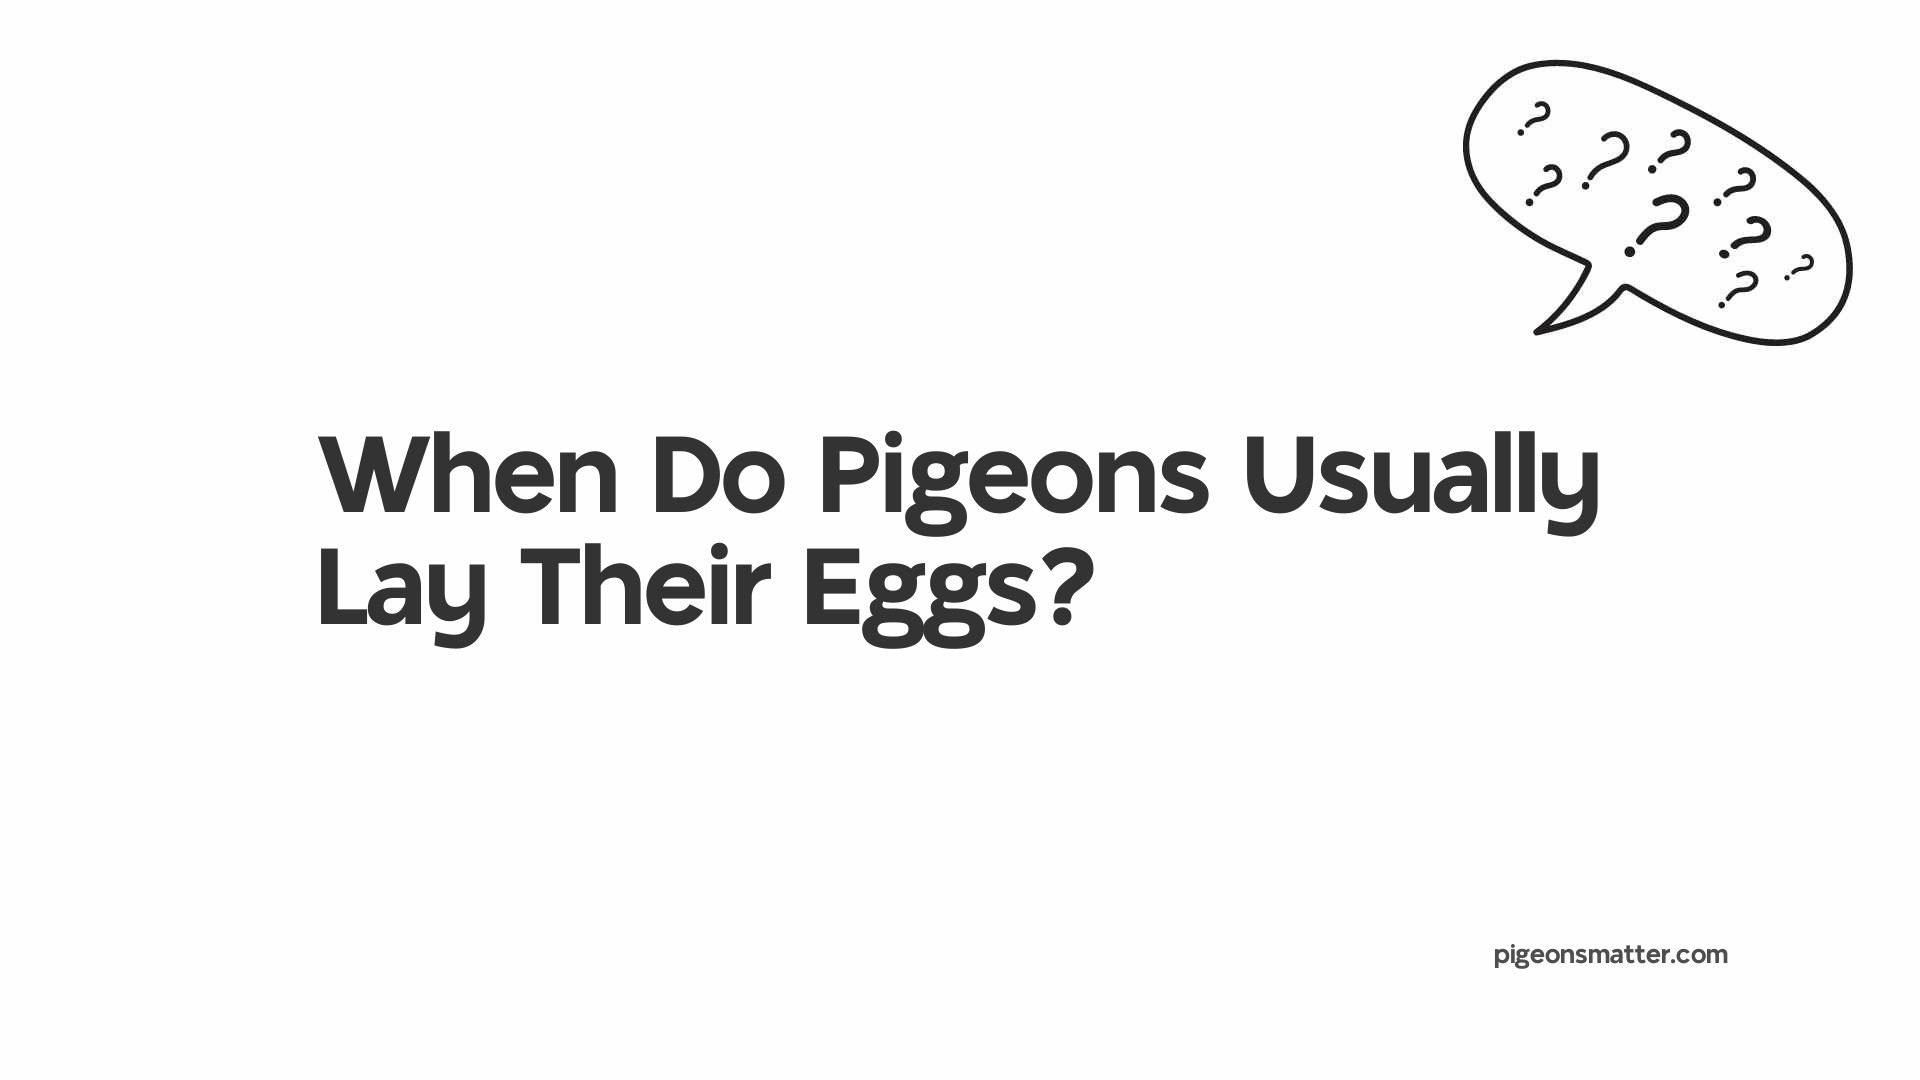 When Do Pigeons Usually Lay Their Eggs?